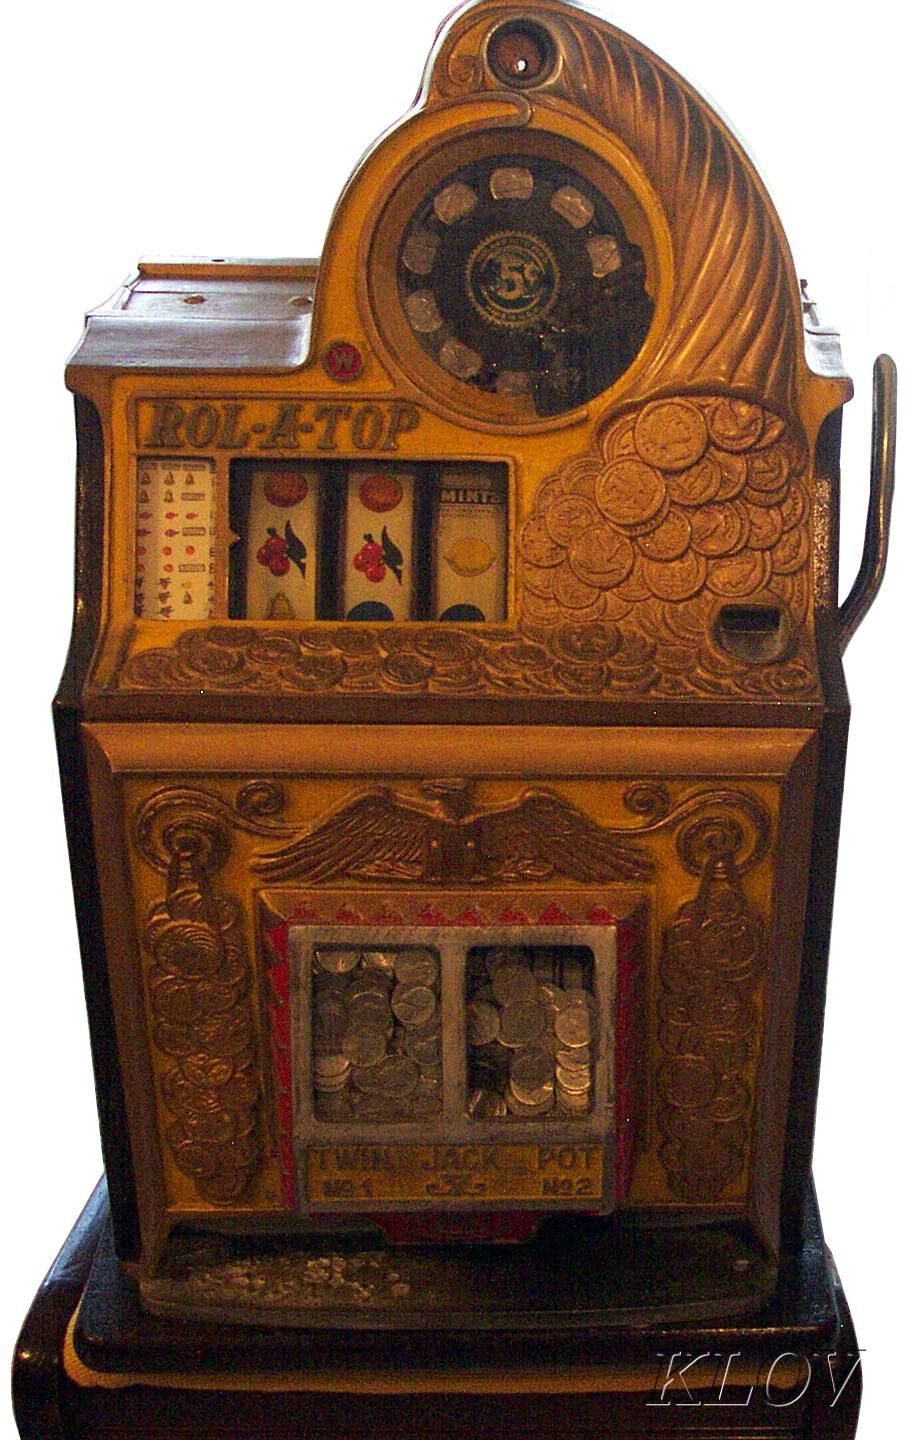 Rol-A-Top - Coin Front - Slot Machine by Watling Manufacturing Co.